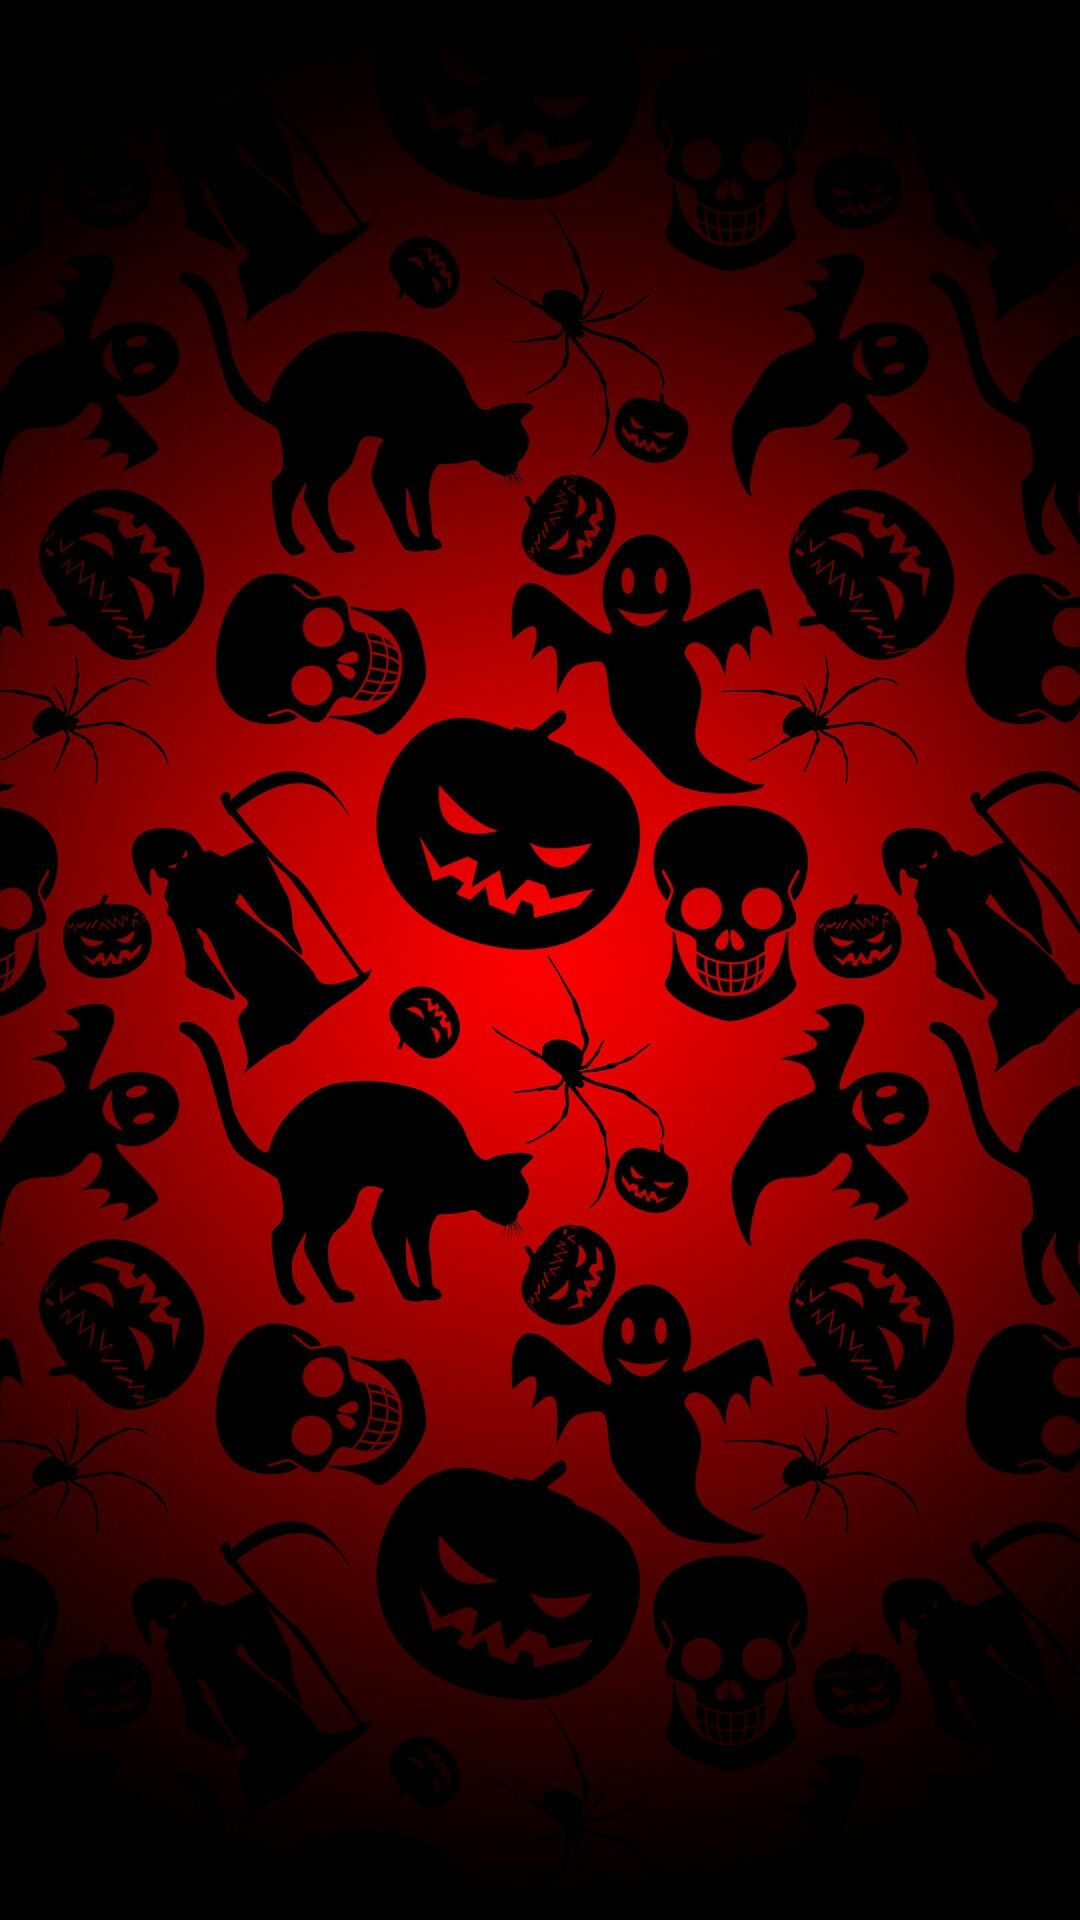 Cats Spiders Jack O Lanterns Ghosts In Black And Red